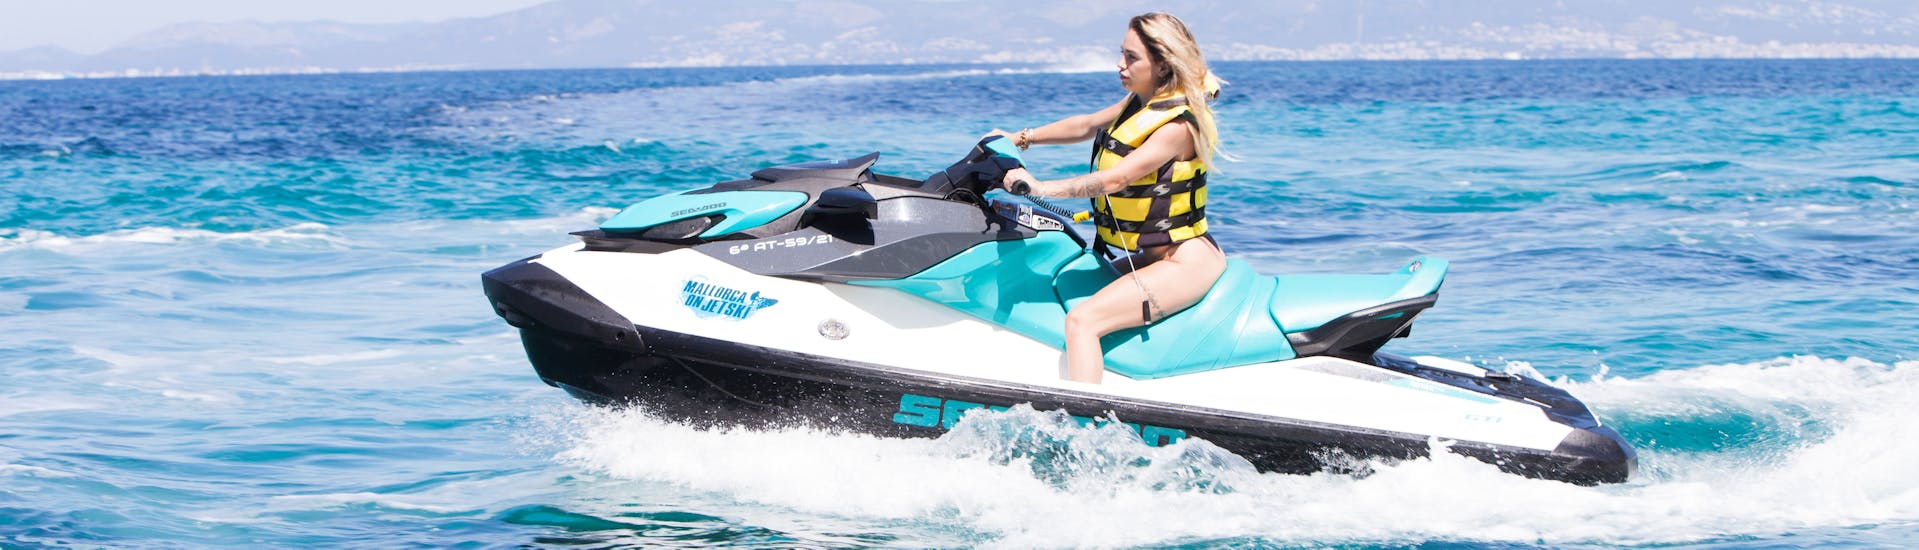 A woman enjoying a ride in the sea during a Jet Ski Safari to Cala del Mago and Portals Vells with Portals on Jetski.